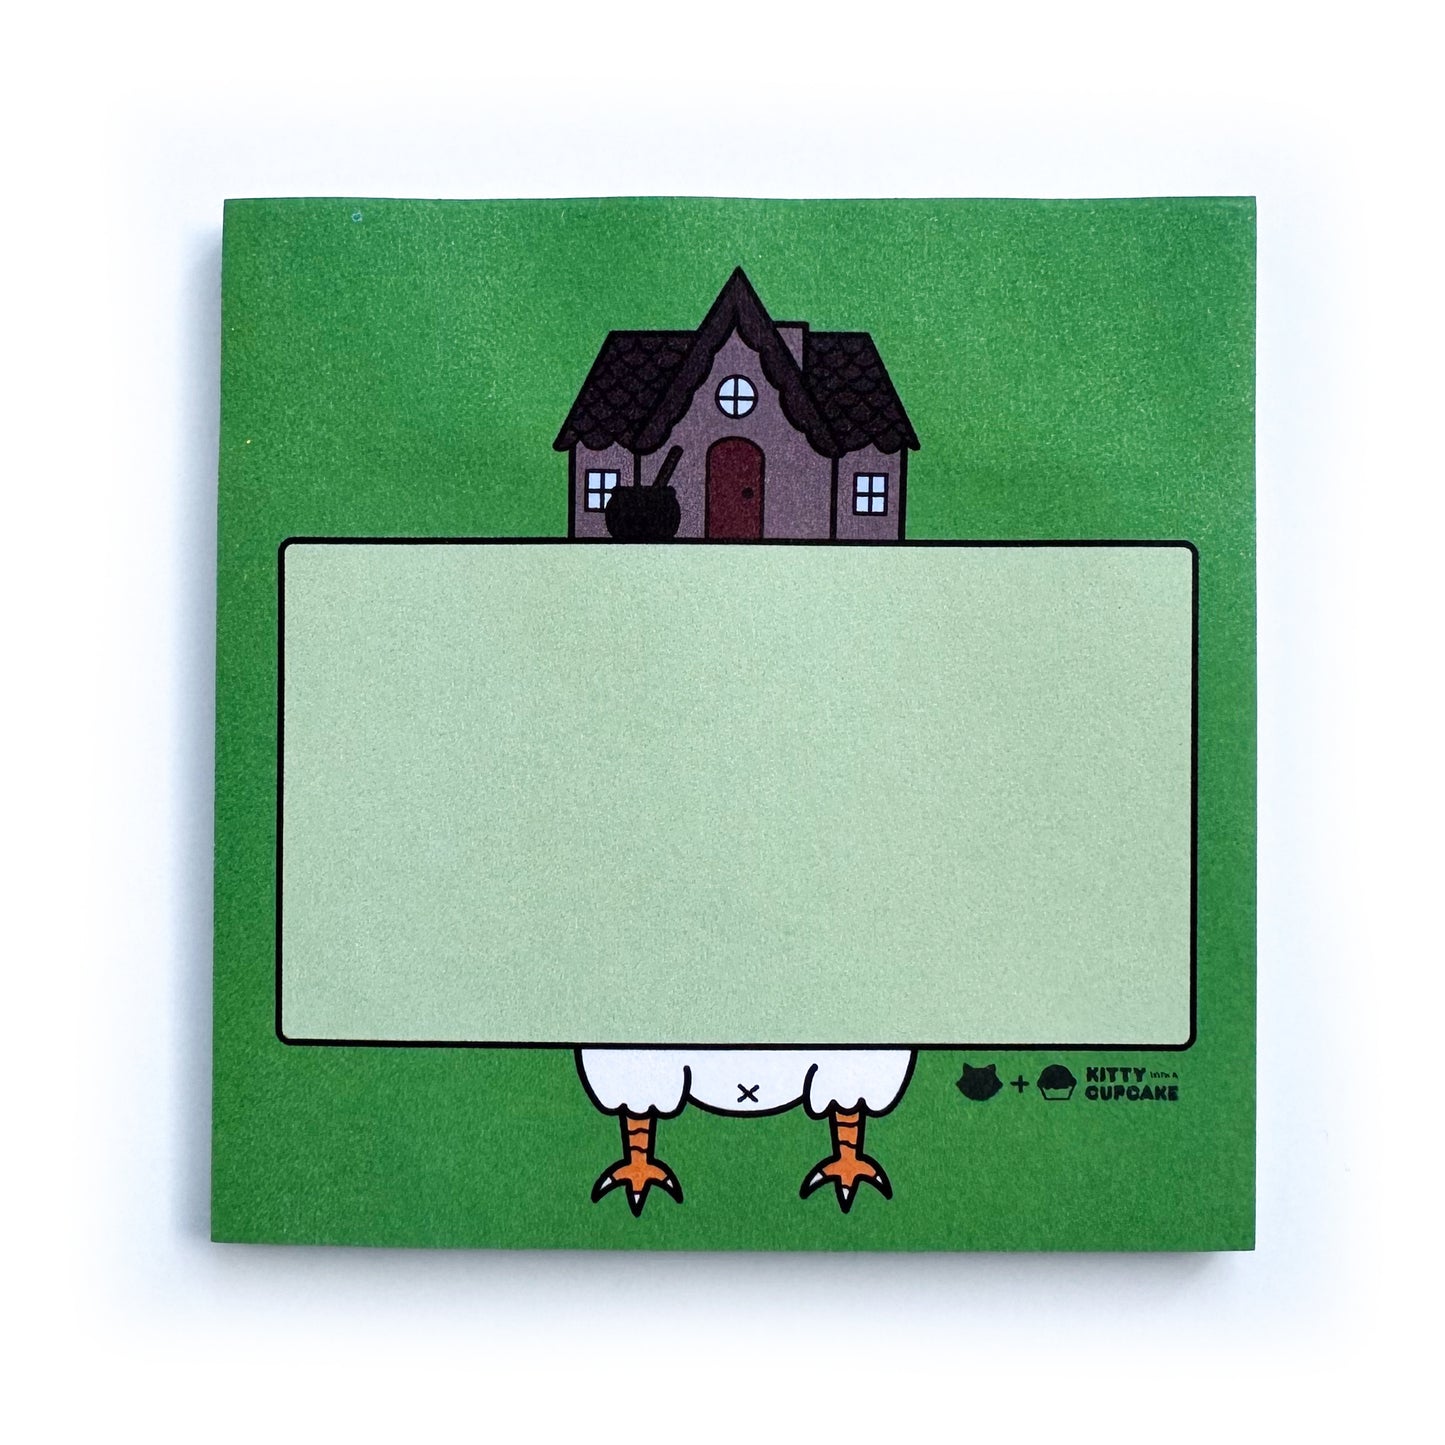 A square pad of green sticky notes featuring an illustration of Baba Yaga's hut surrounding a light green box which is an area to write in. 